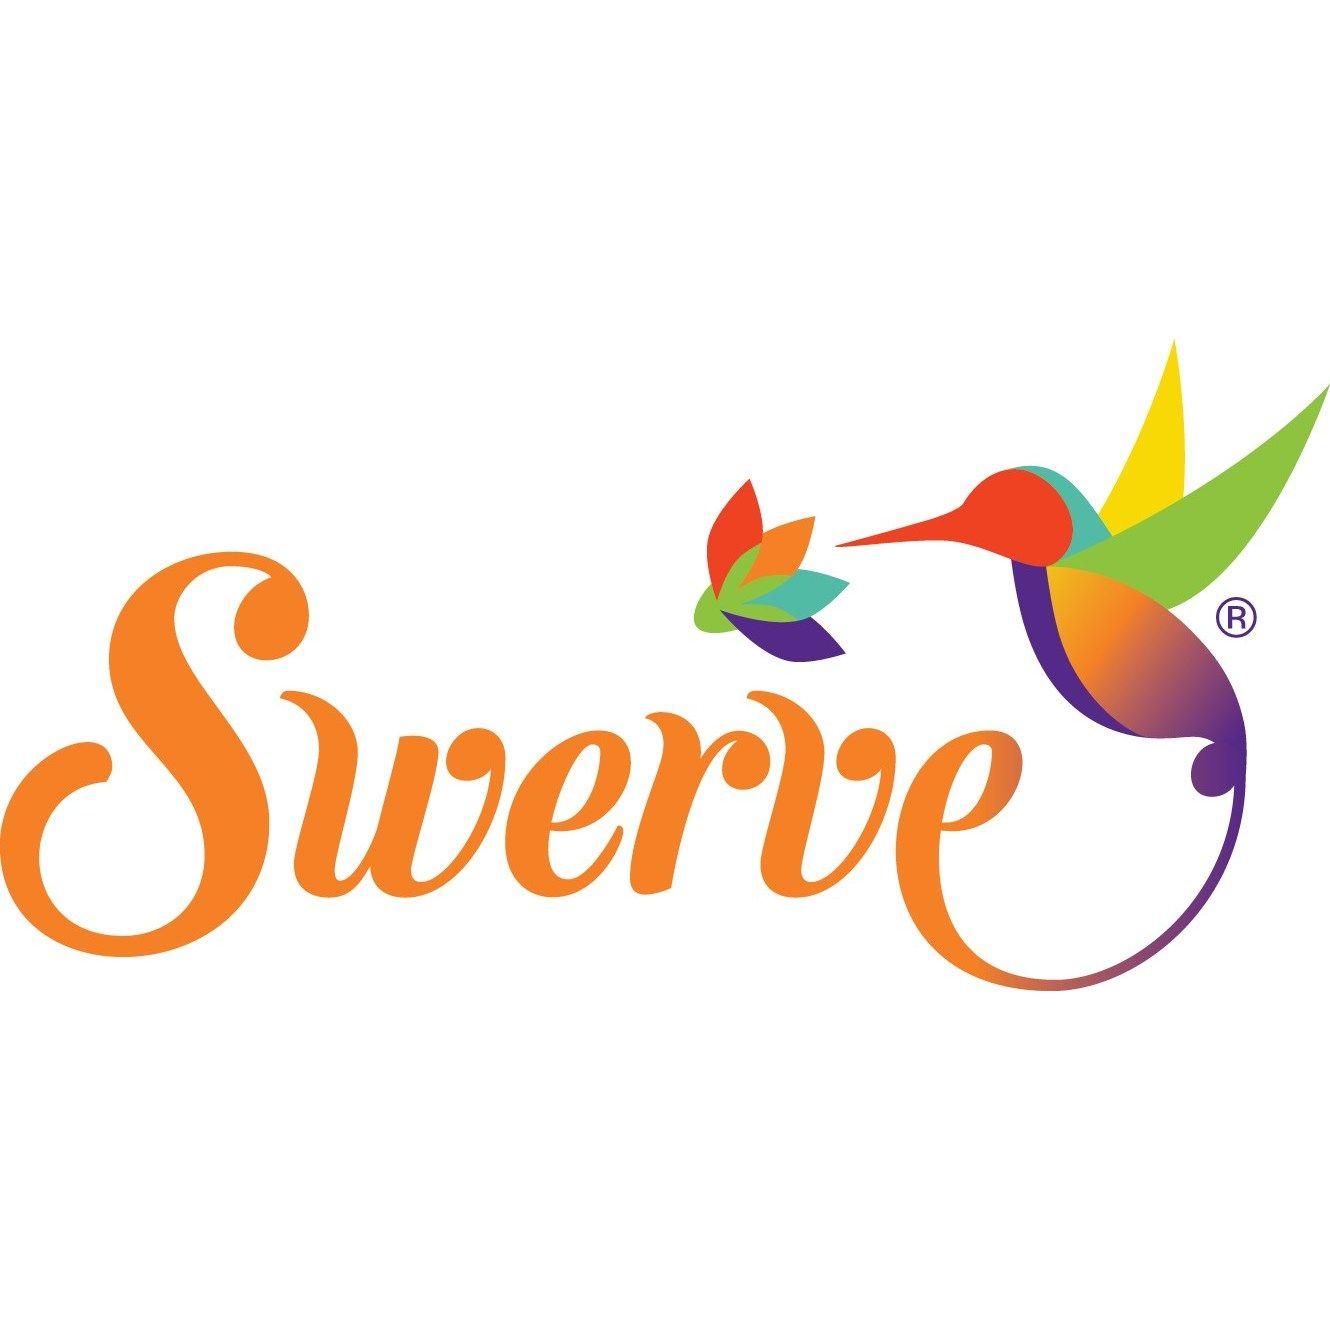 Swerve Logo - Swerve Declares the Golden Cake as the Official Dessert